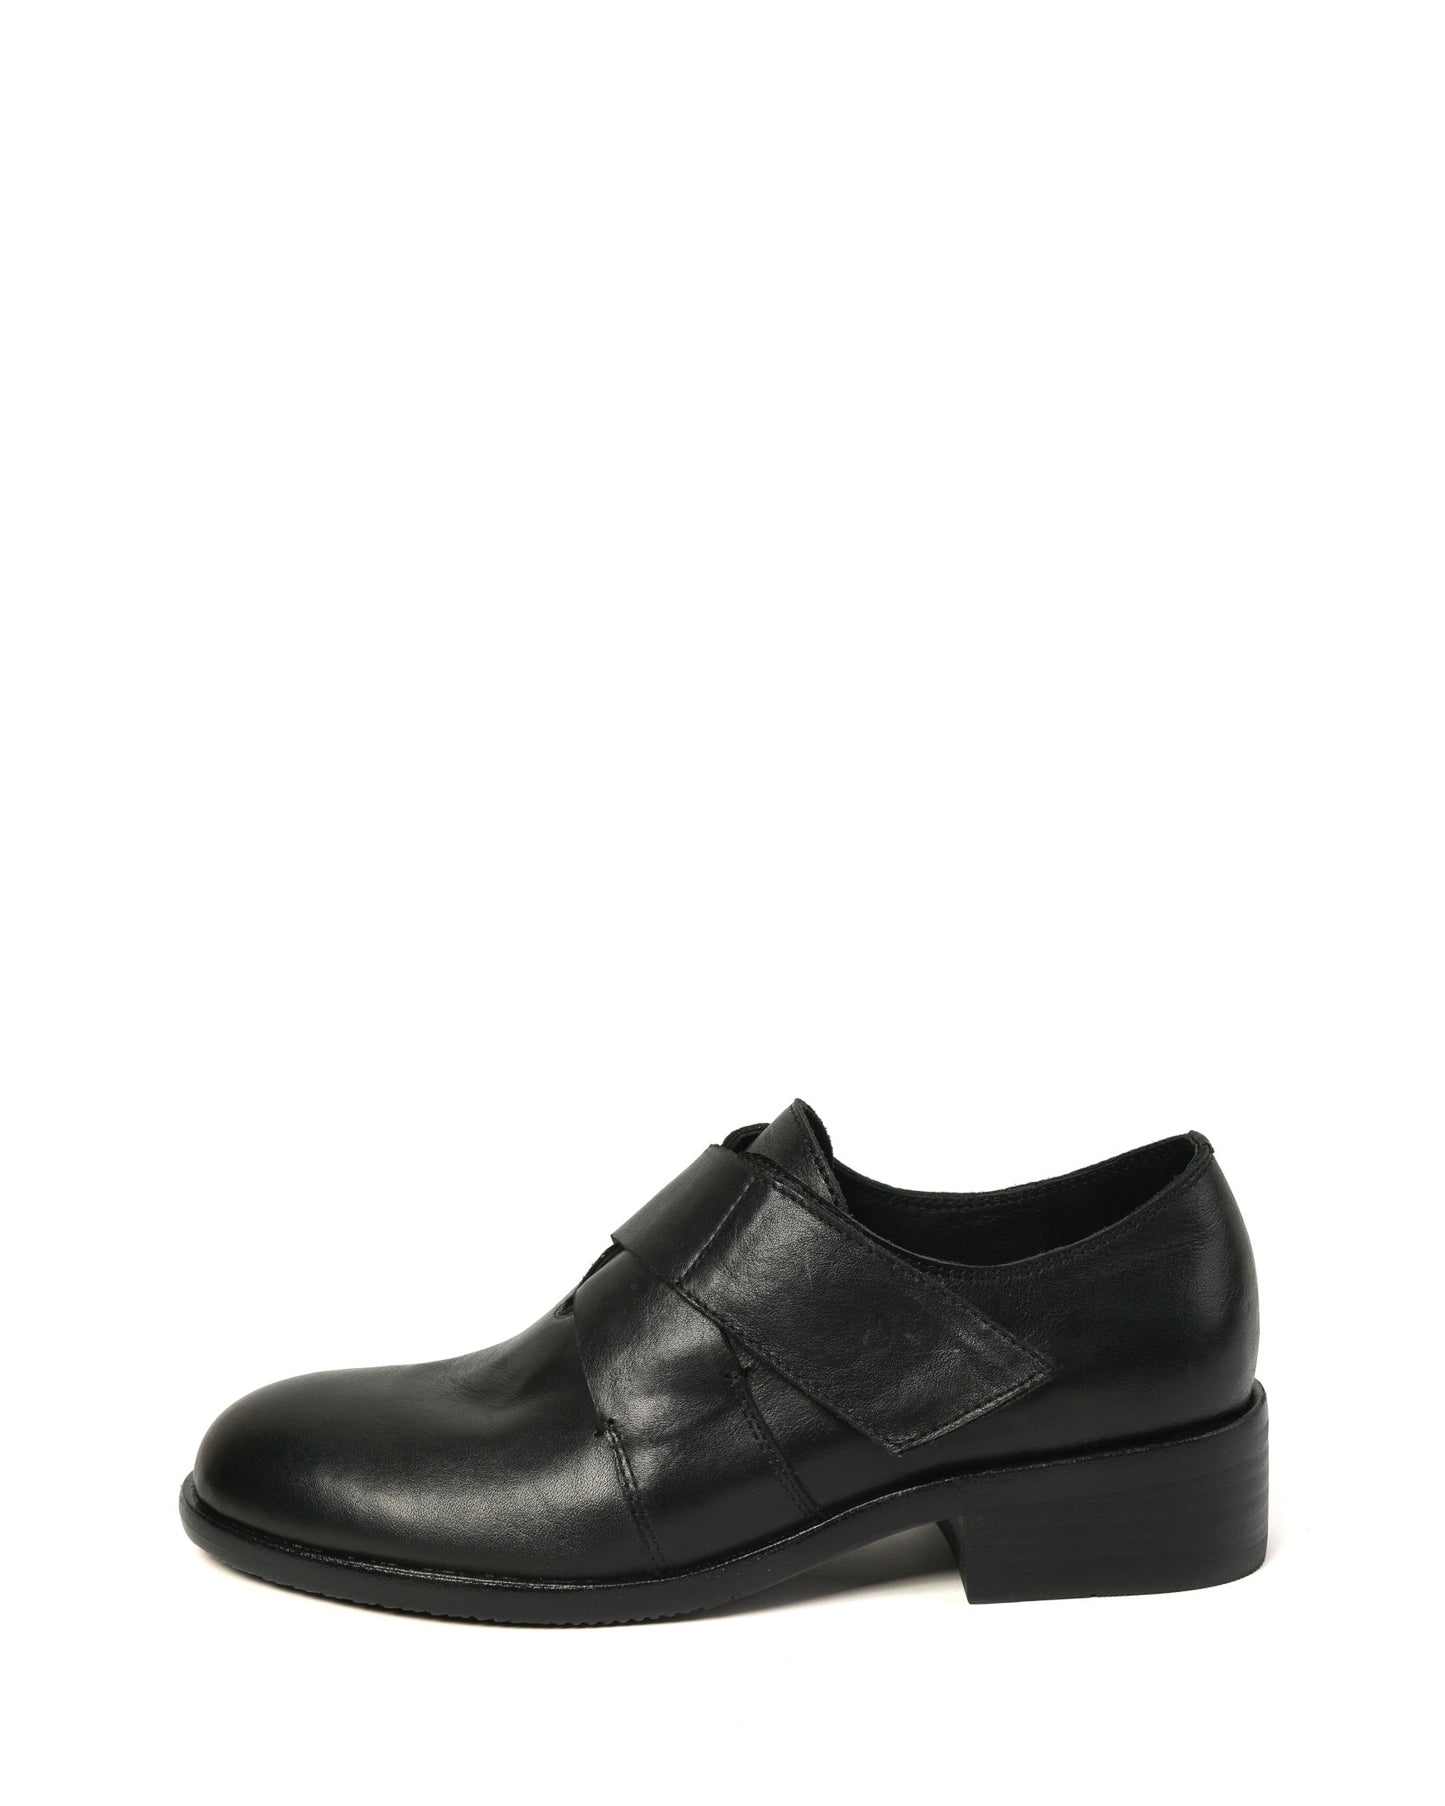 Ferio-black-leather-loafers-1